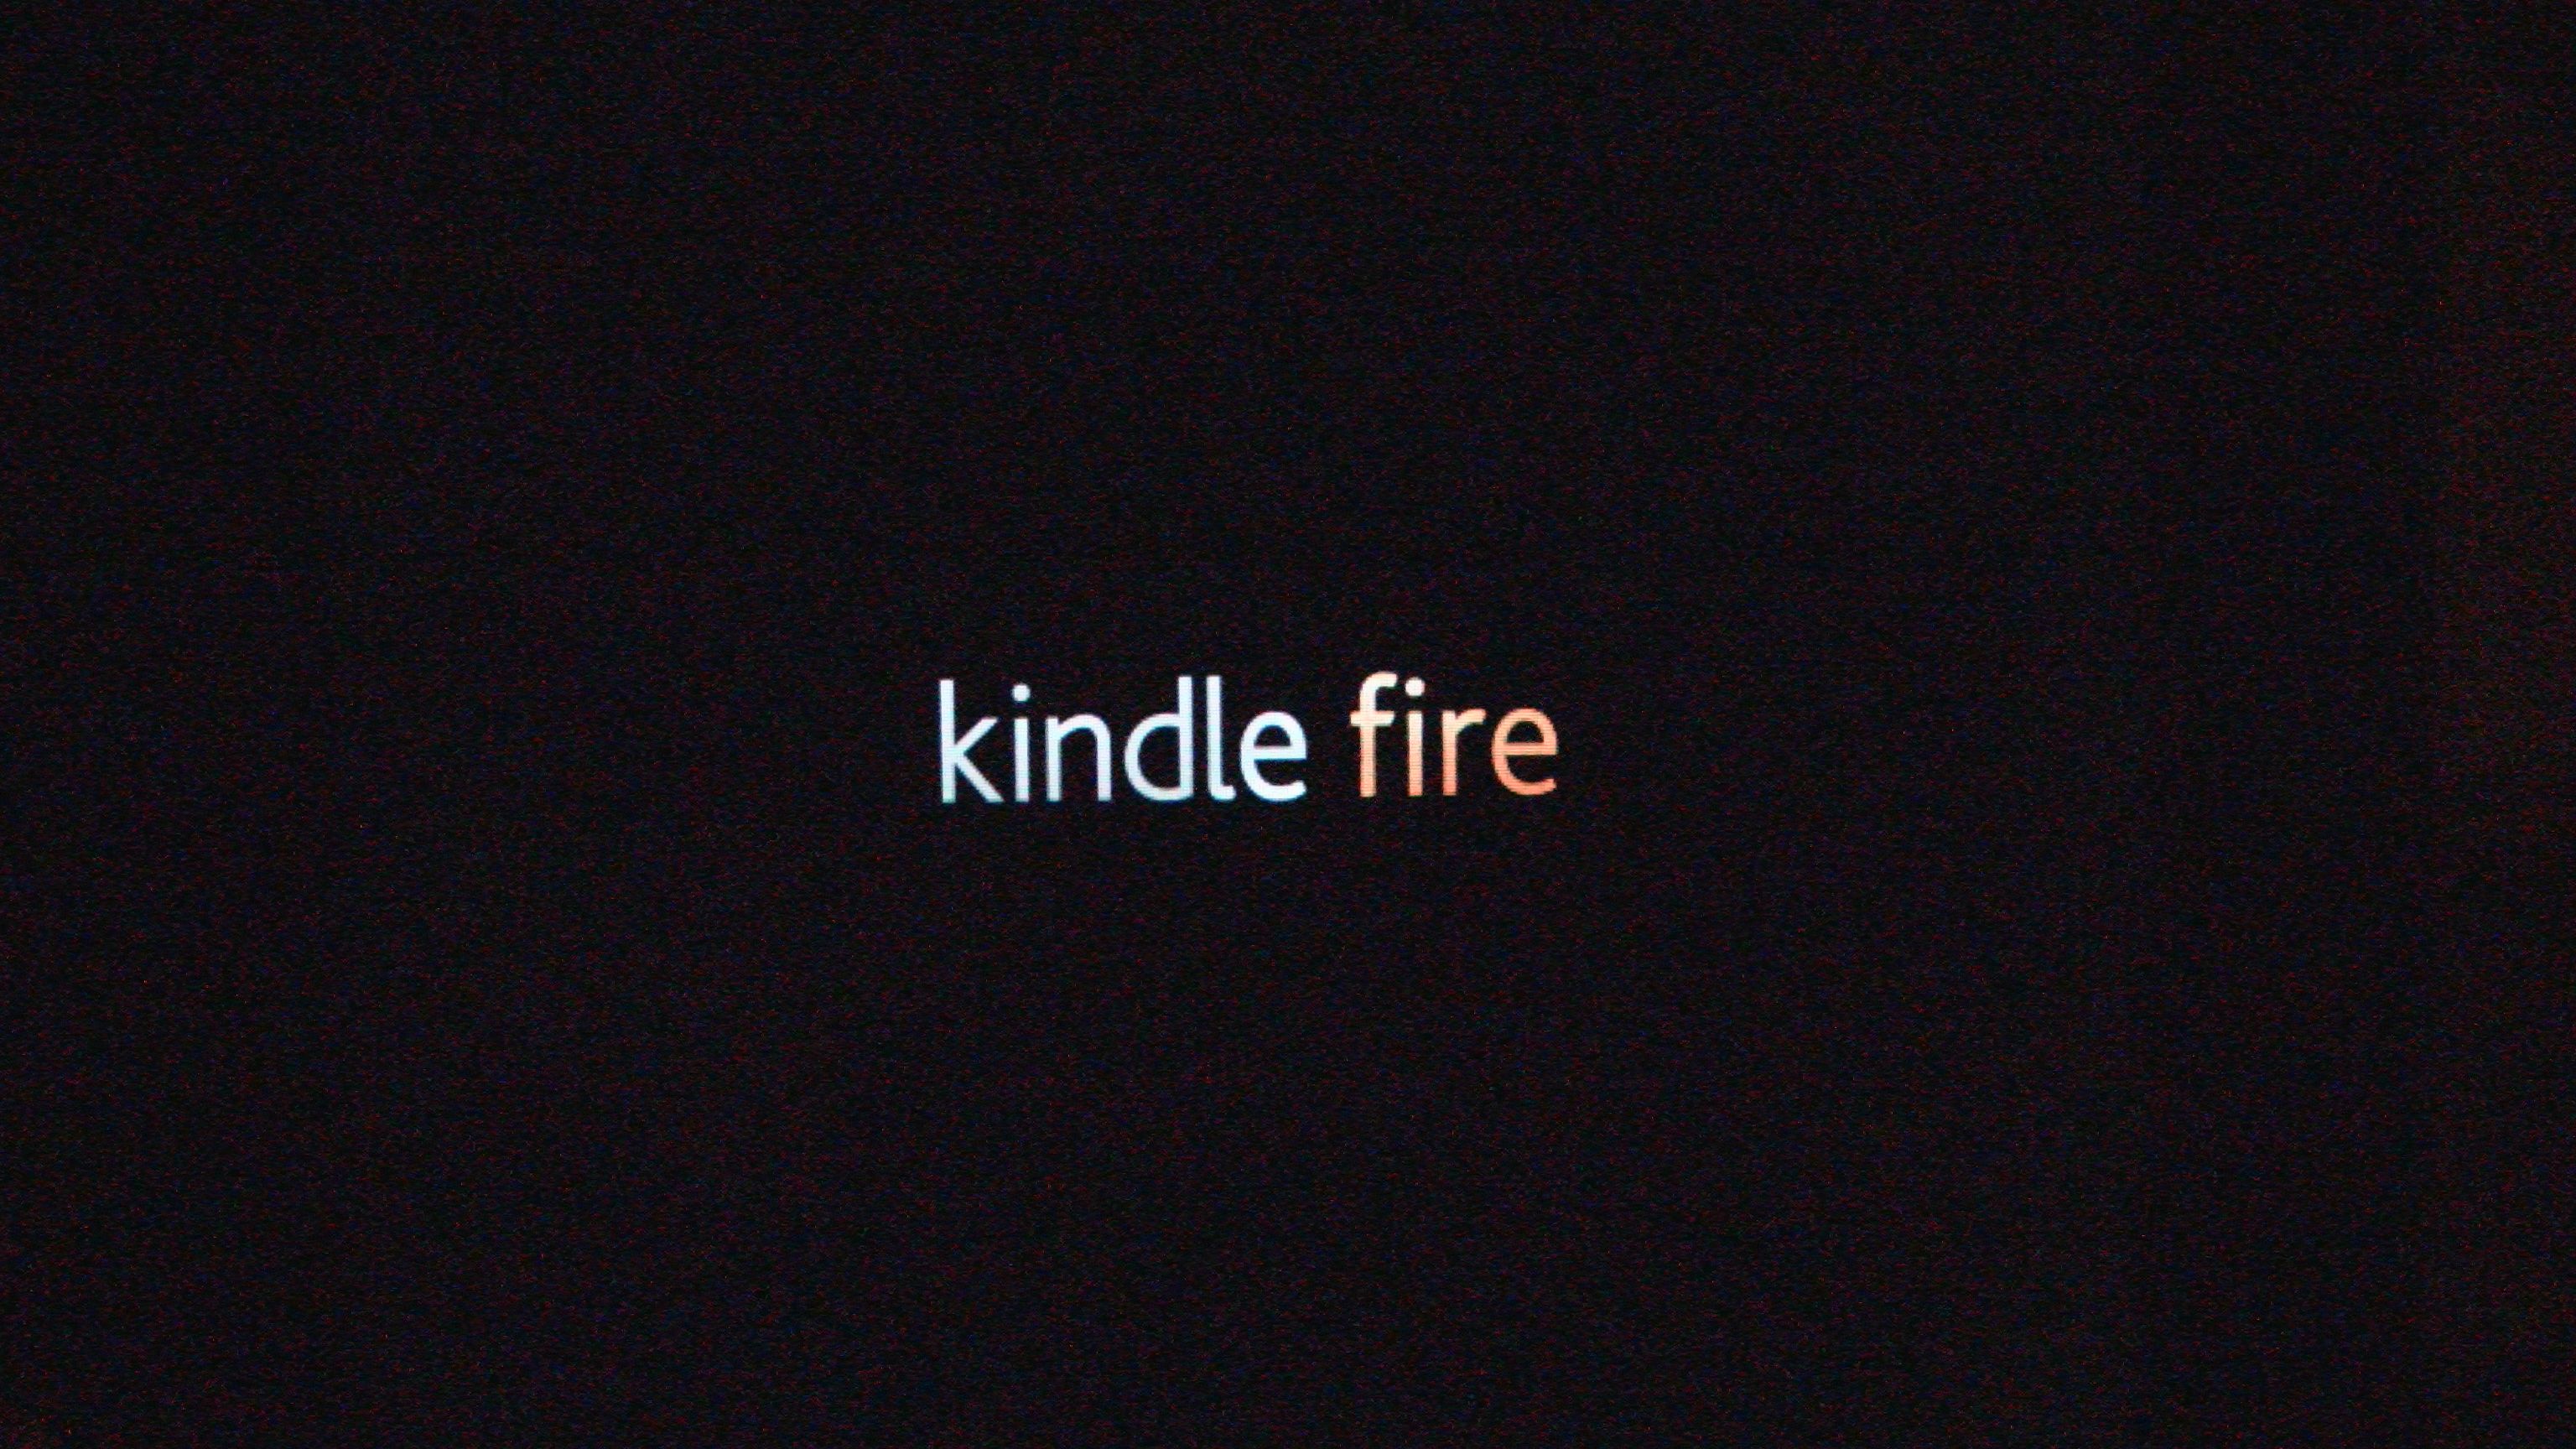 Free Download Amazons New Kindle Fire Tablet Is Hot Owner Review Booya Gadget 3072x1728 For Your Desktop Mobile Tablet Explore 49 Amazon Fire Car Wallpaper Wallpaper For Amazon Fire